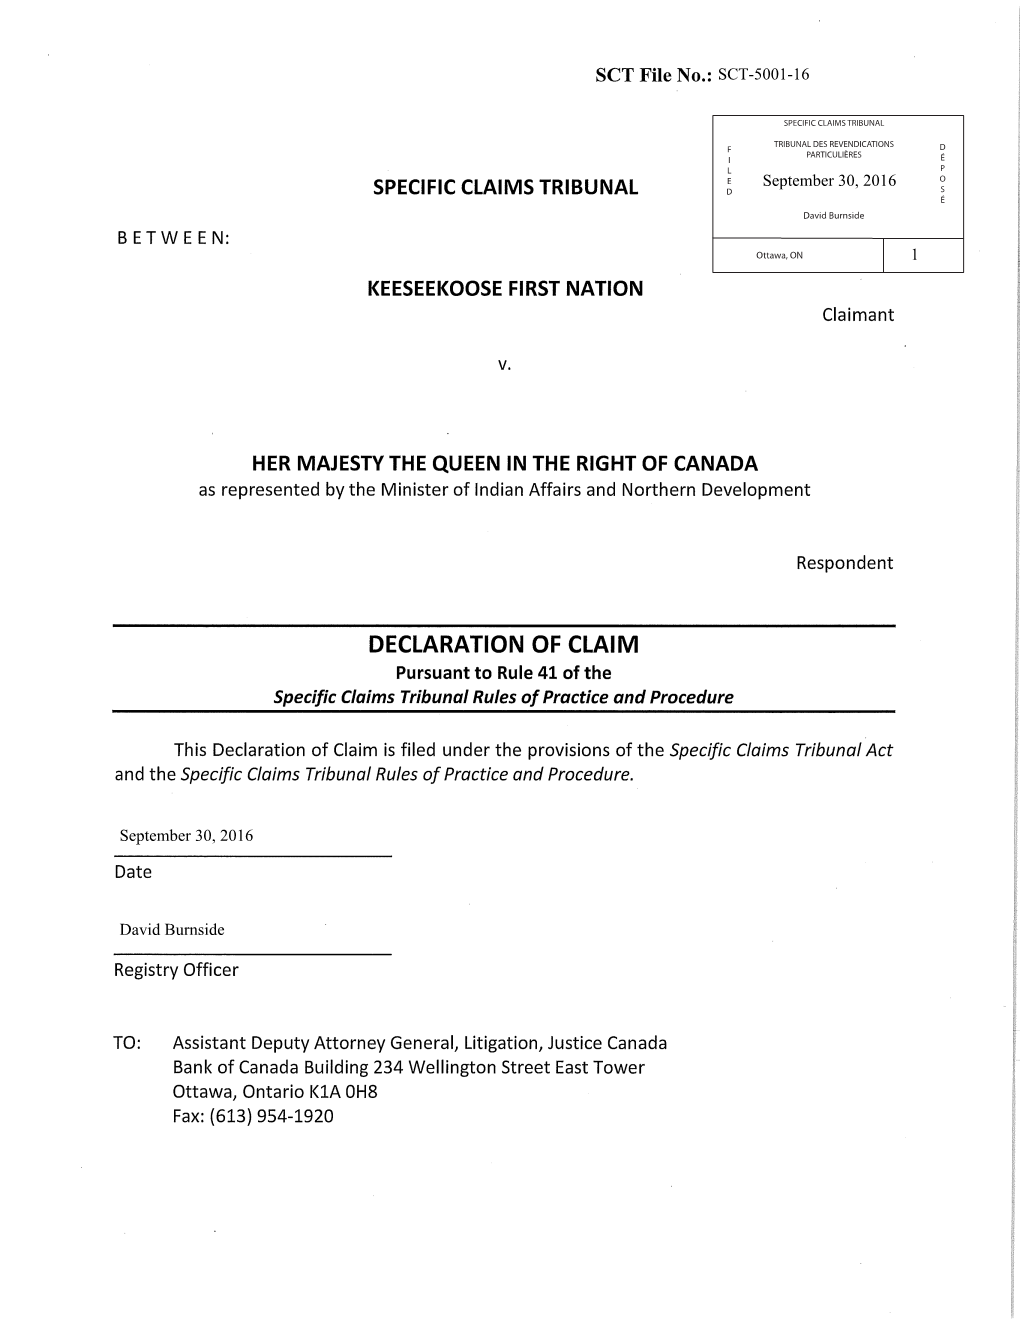 DECLARATION of CLAIM Pursuant to Rule 41 of the Specific Claims Tribunal Rules Ofpractice and Procedure